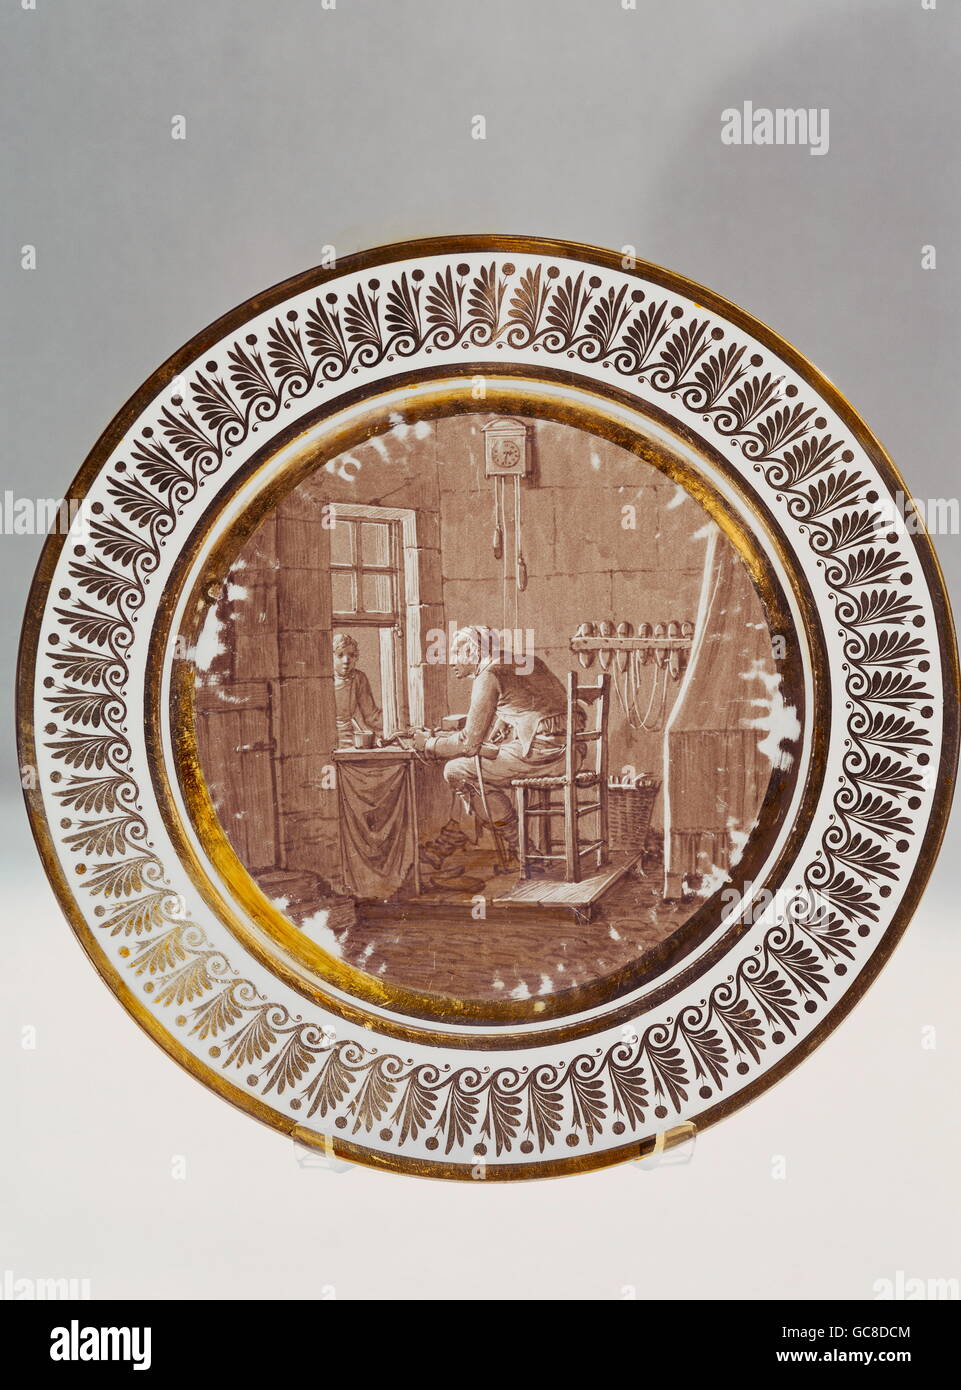 fine arts, porcelain, plate, painted, 'shoemaker workshop', from service 'campaigns and rural life', diameter 23,5 cm, Sevres Manufactory, 1806 / 1808, Stock Photo